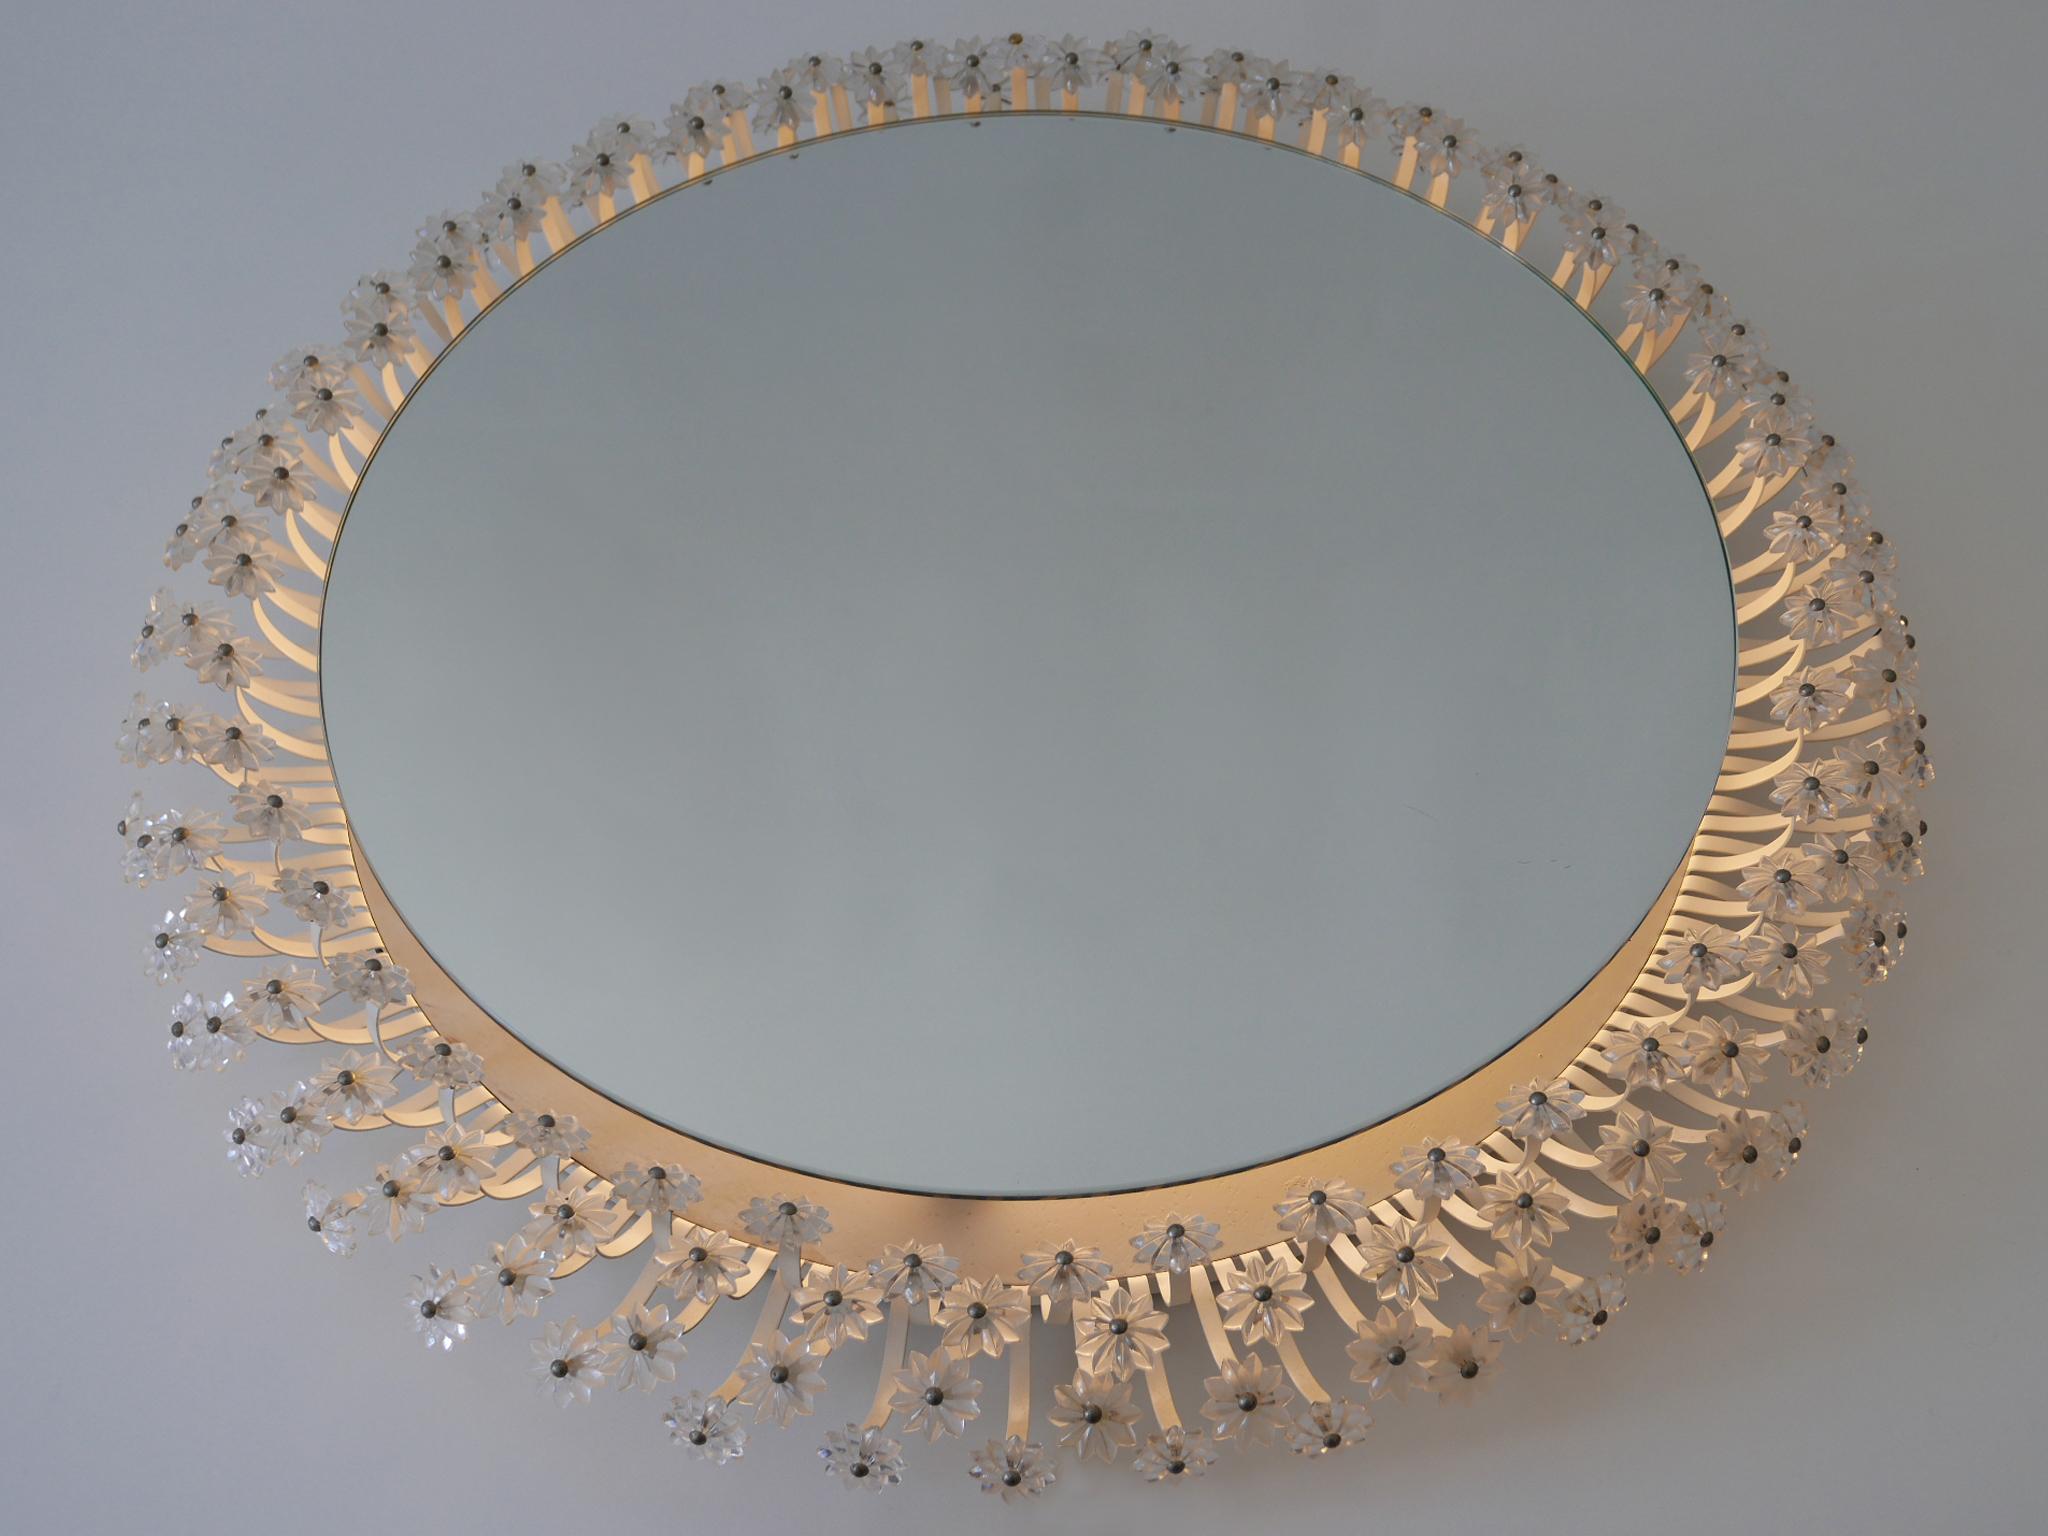 Decorative Mid-Century Modern Backlit Wall Mirror by Schöninger Germany 1960s For Sale 9